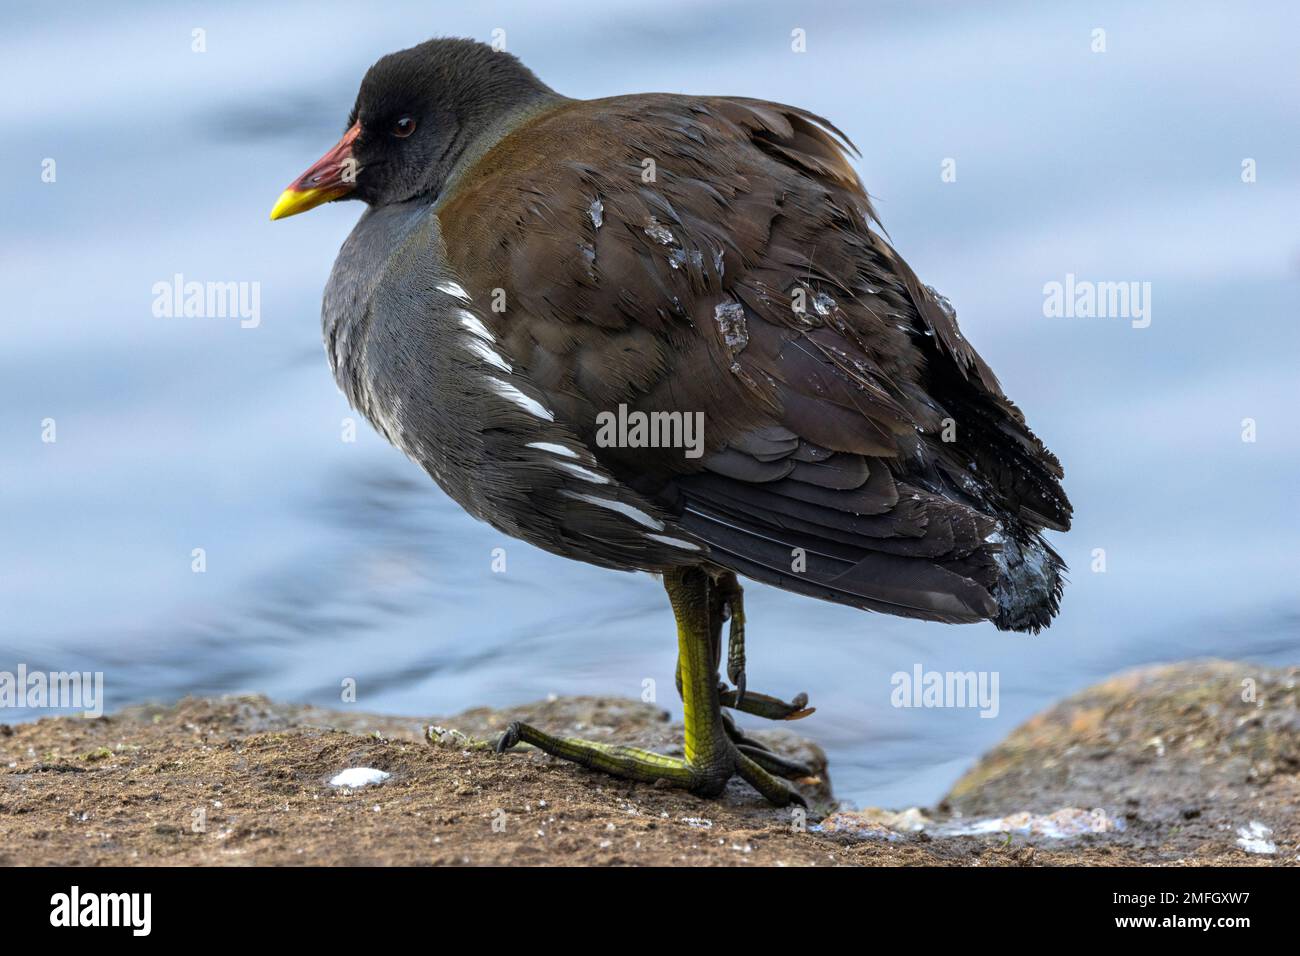 The Moorhen is one of the commonest of the Rail family found in the UK. They are found on all inland waterways and often in close to Coots Stock Photo